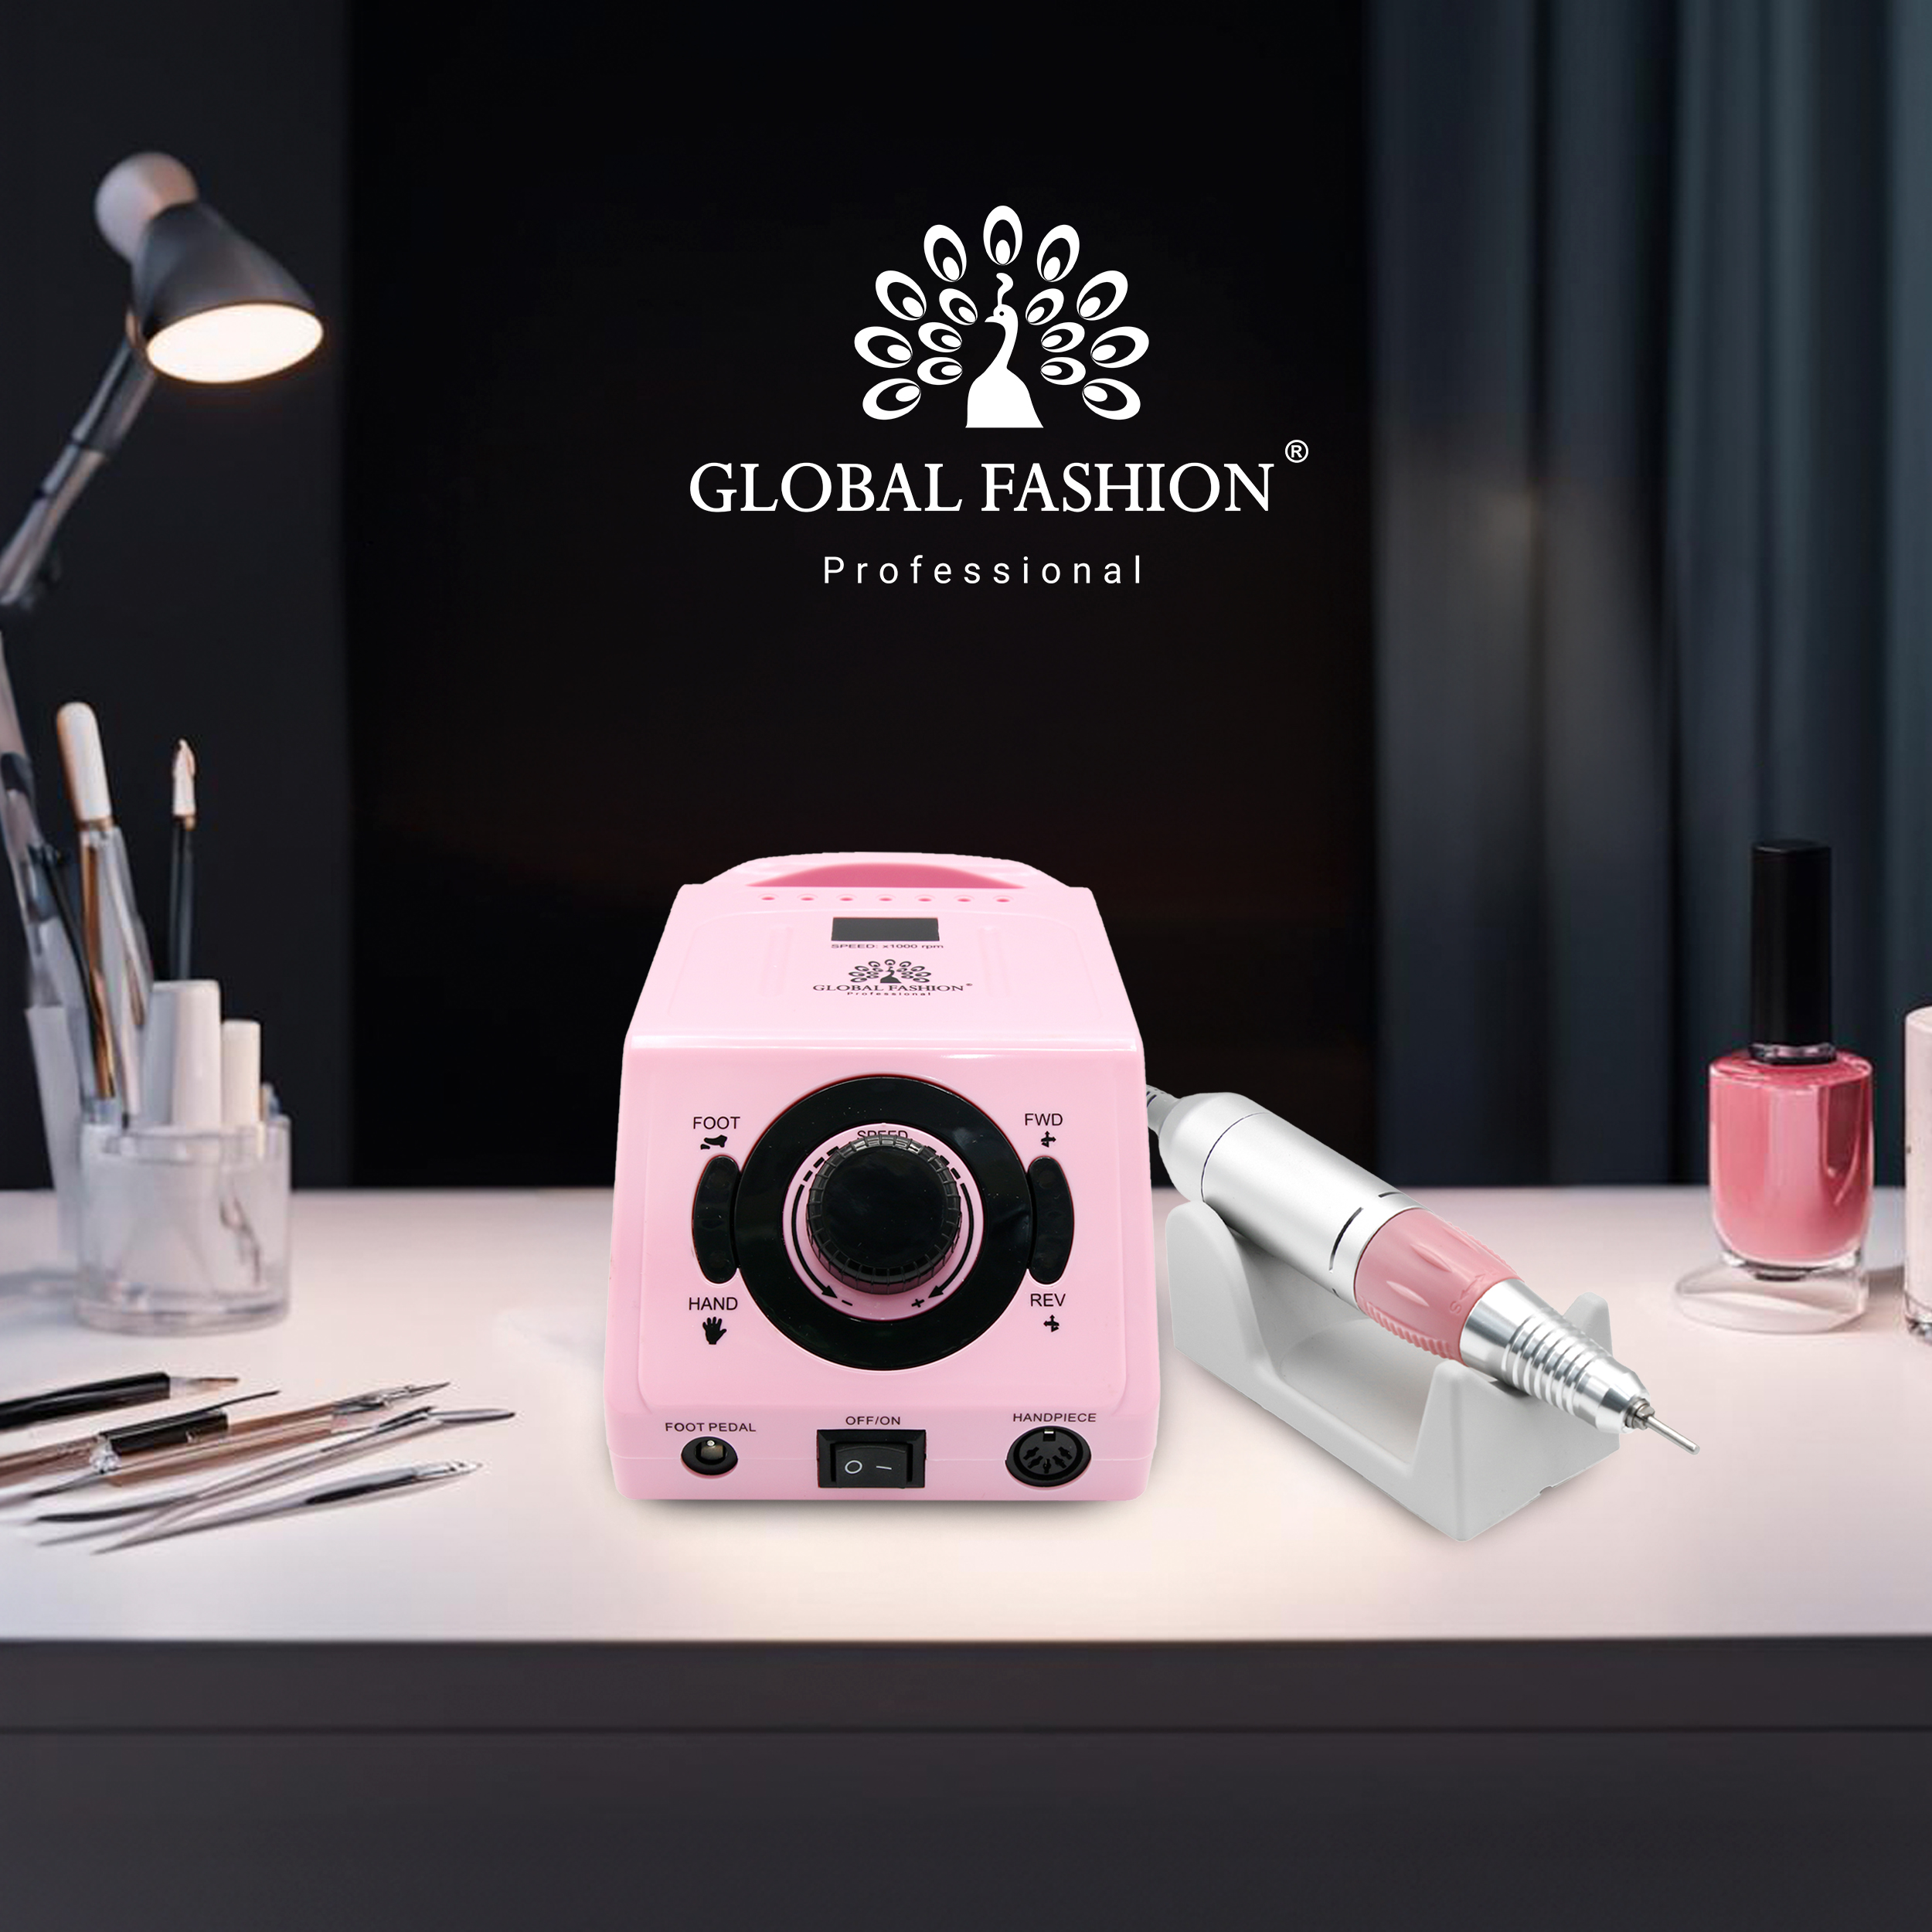 Electric nail drill ZS-716 Global Fashion 65W 35000 rpm - one of the best nail clippers